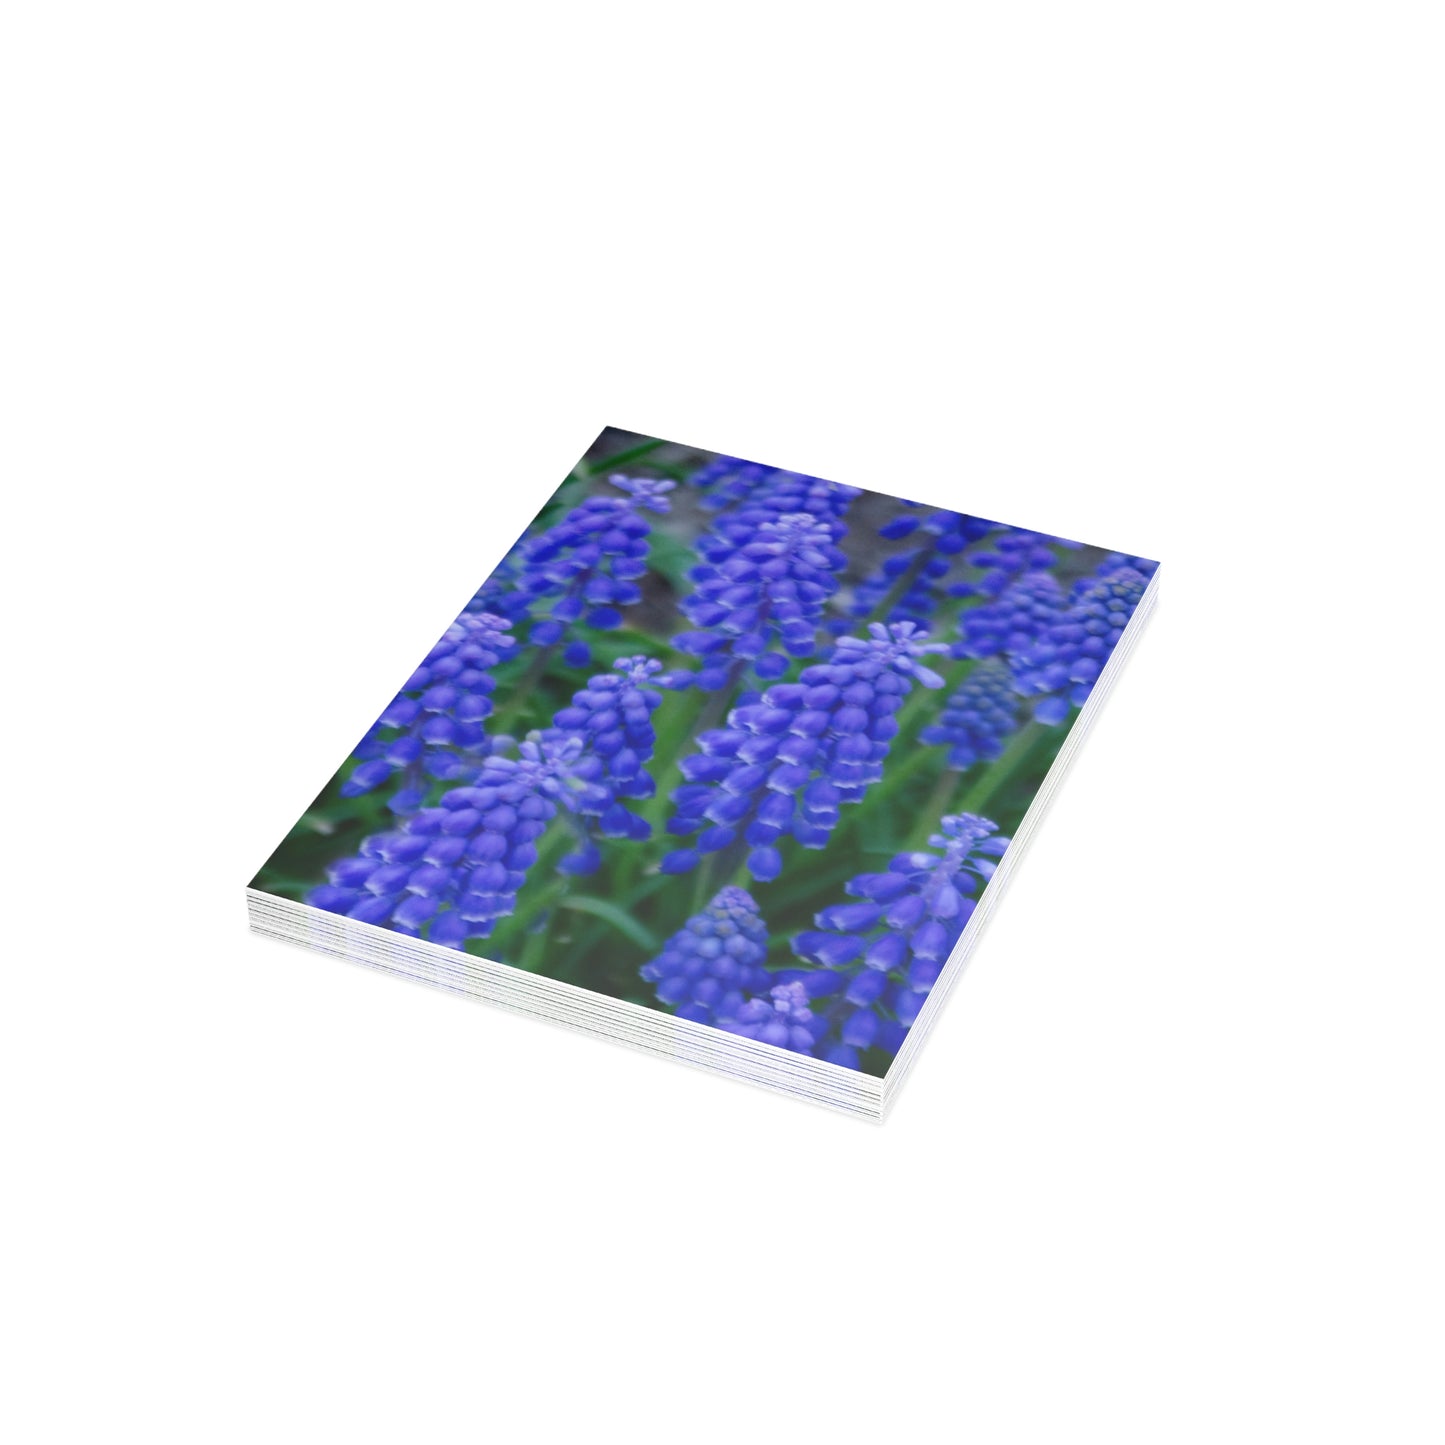 Flowers 10 Greeting Cards (1, 10, 30, and 50pcs)